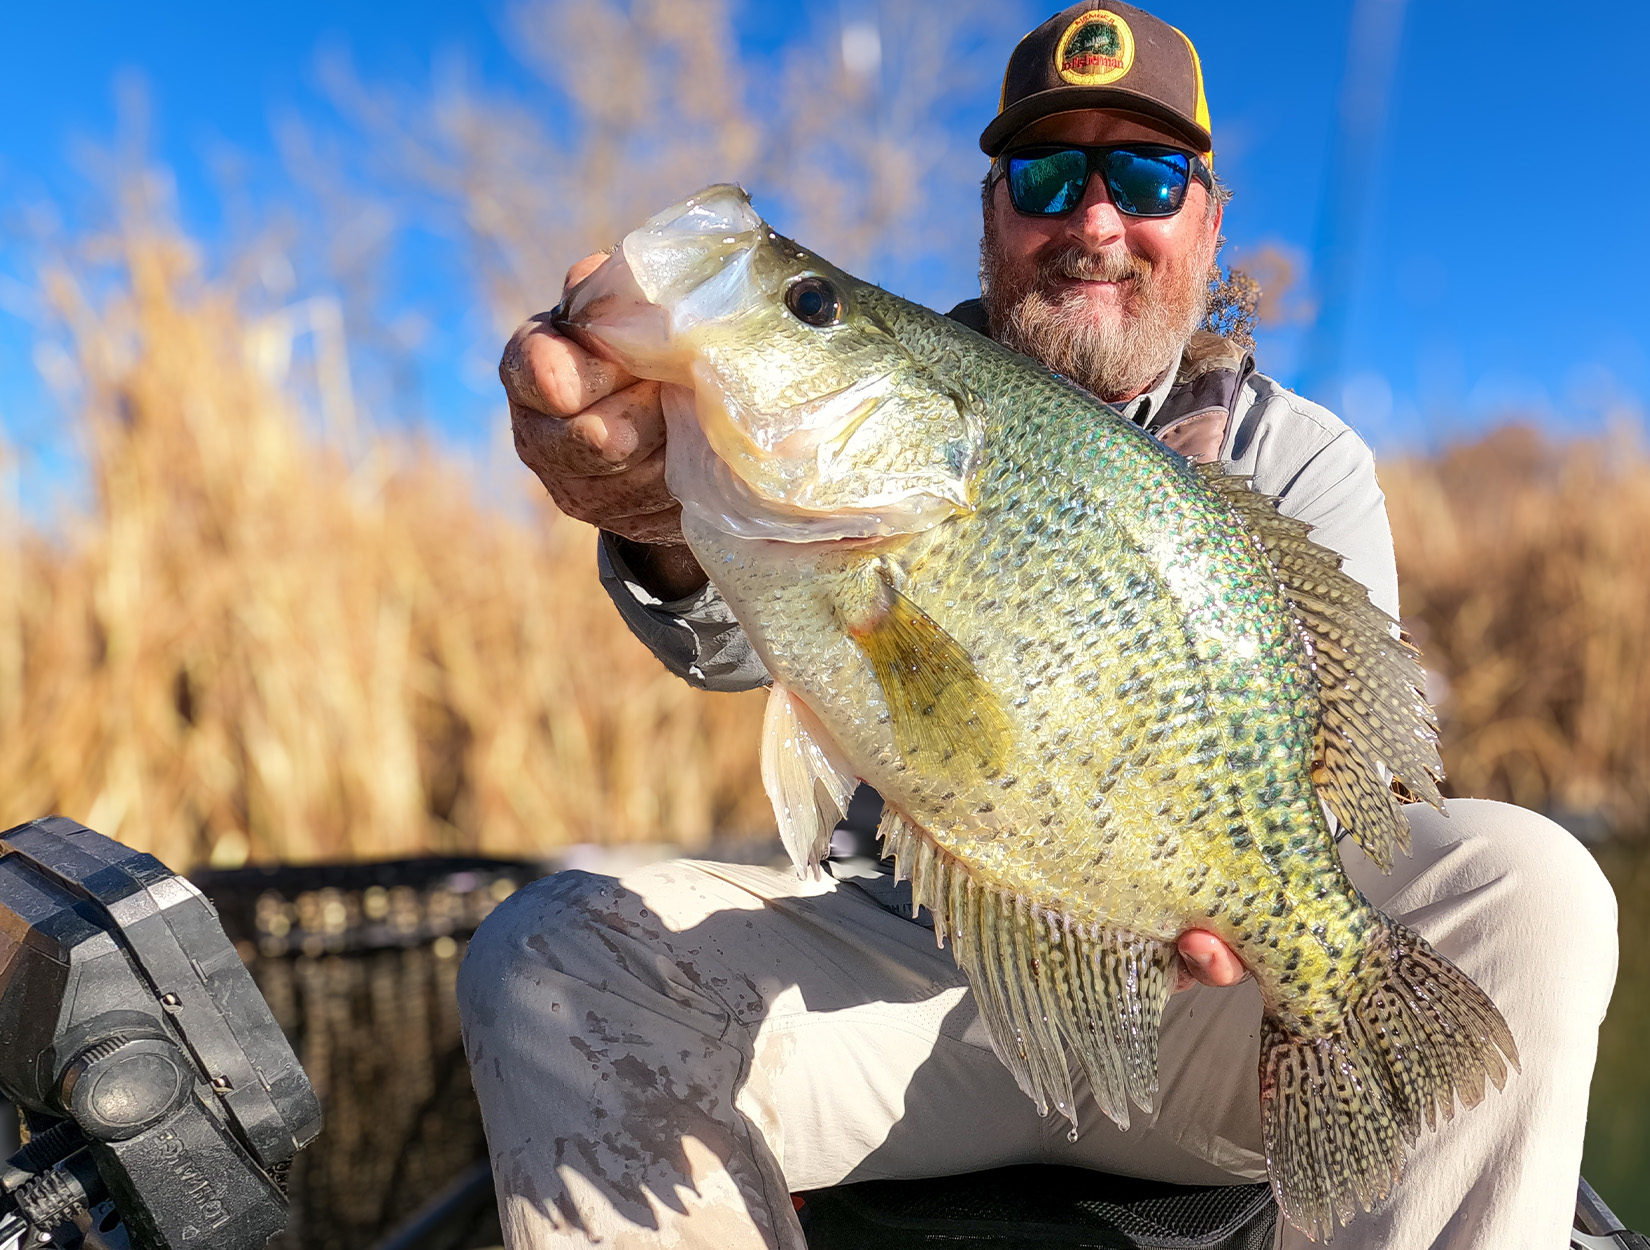 A kayak angler holds up a state-record crappie caught in Colorado.